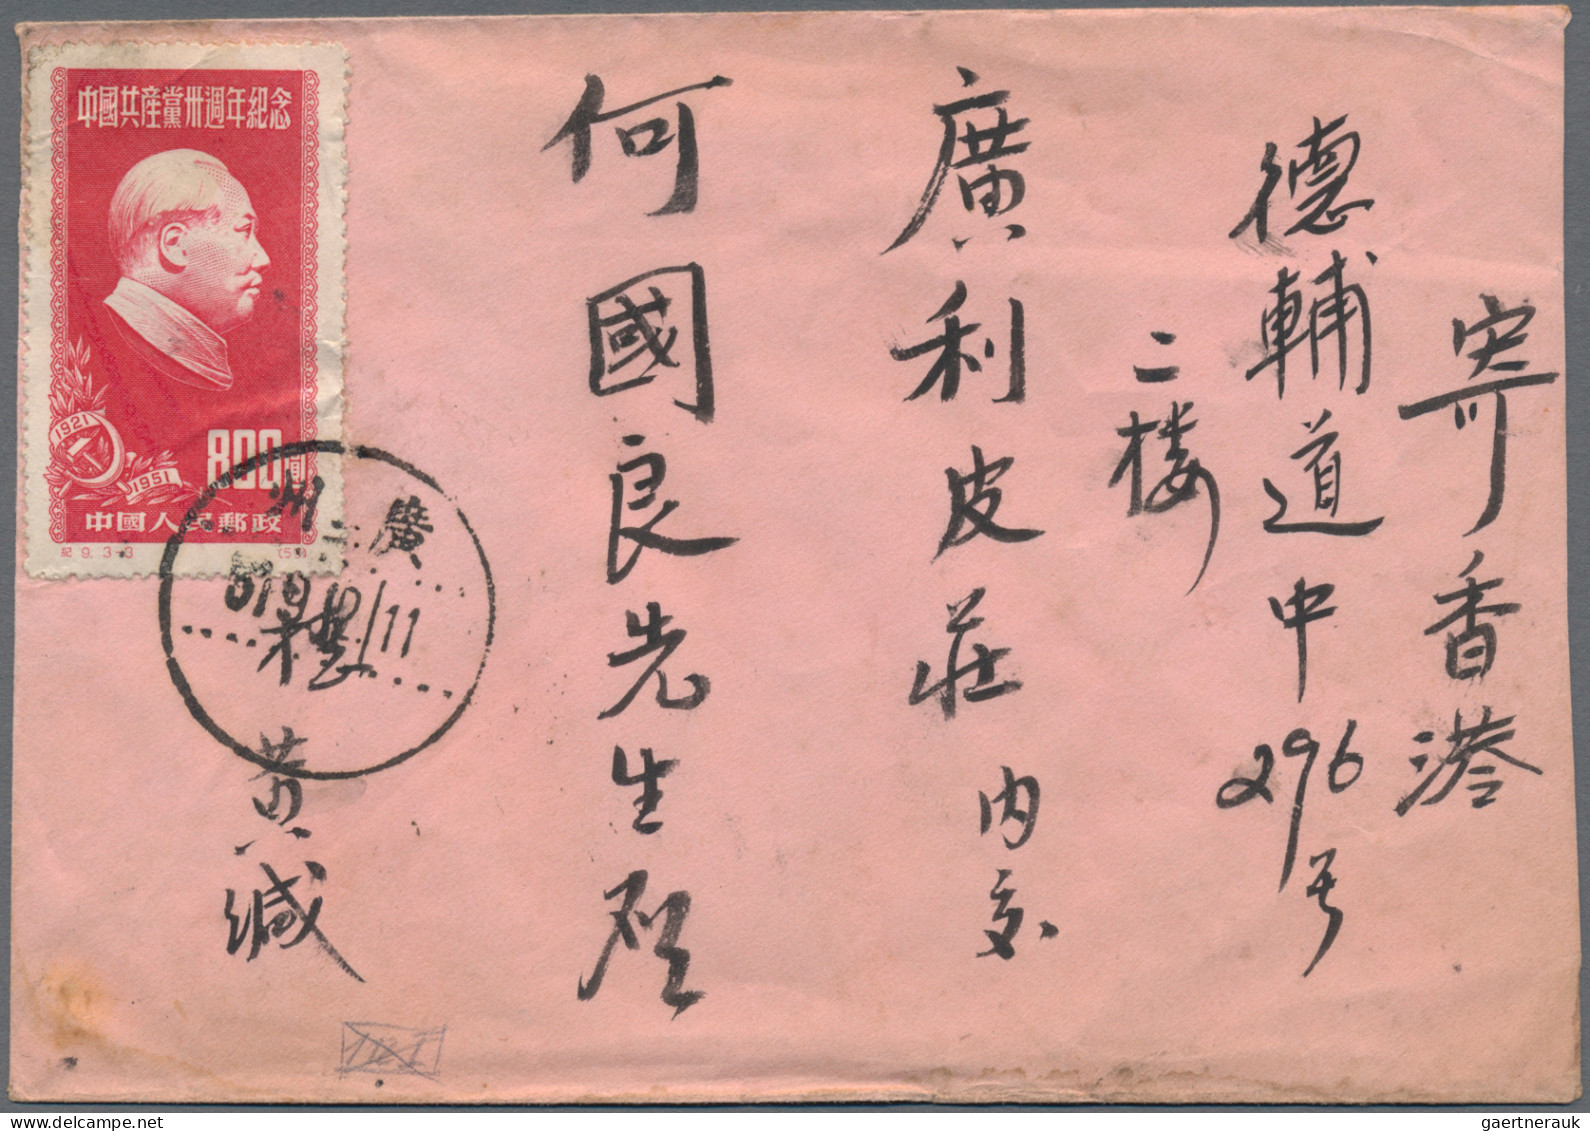 China (PRC): 1949/1955, group of 24 old currency covers, a postcard, and a parti